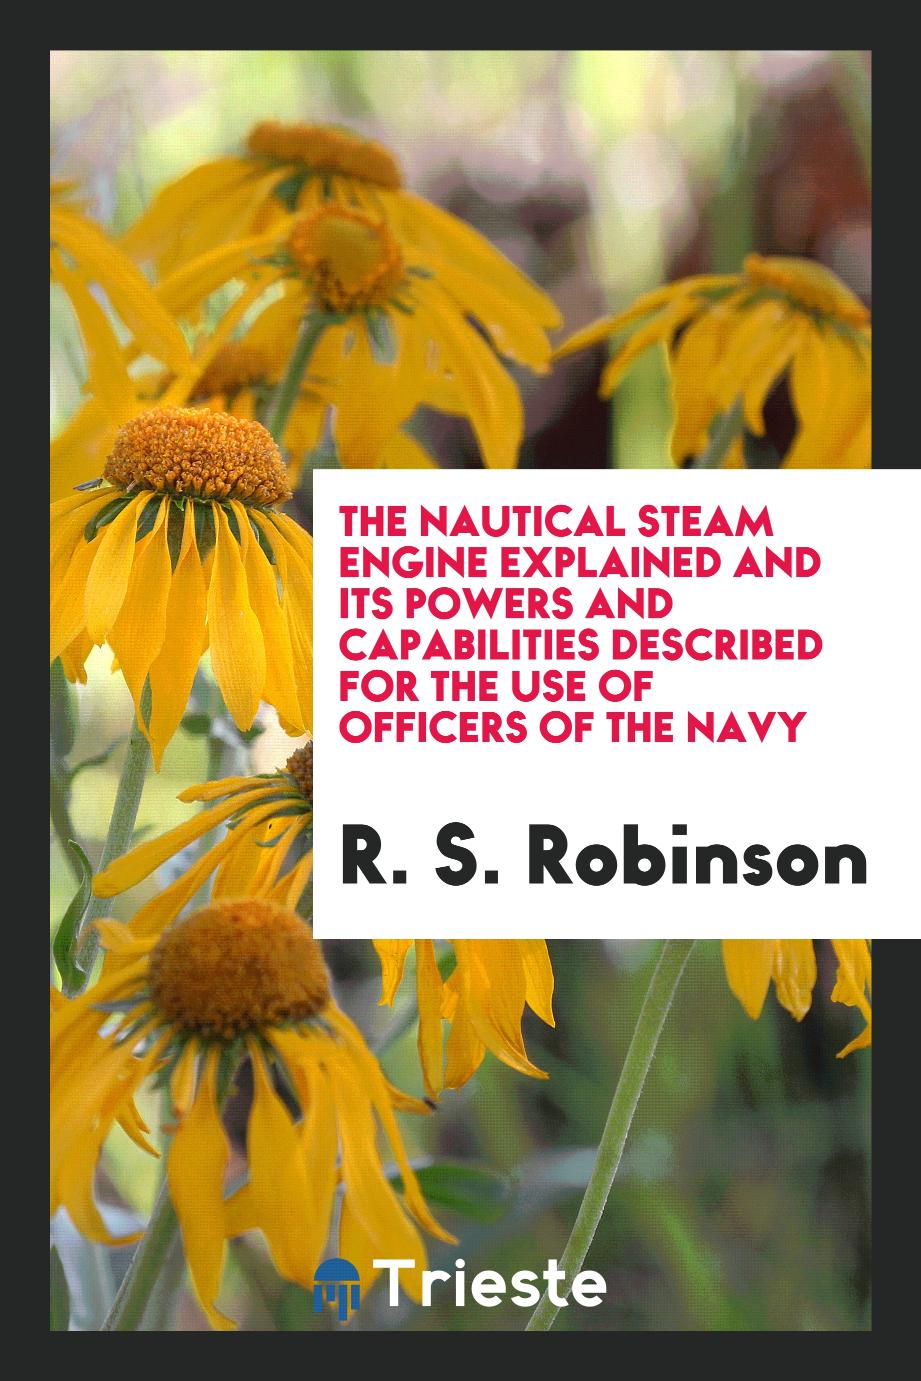 The Nautical Steam Engine Explained and Its Powers and Capabilities Described for the Use of Officers of the Navy